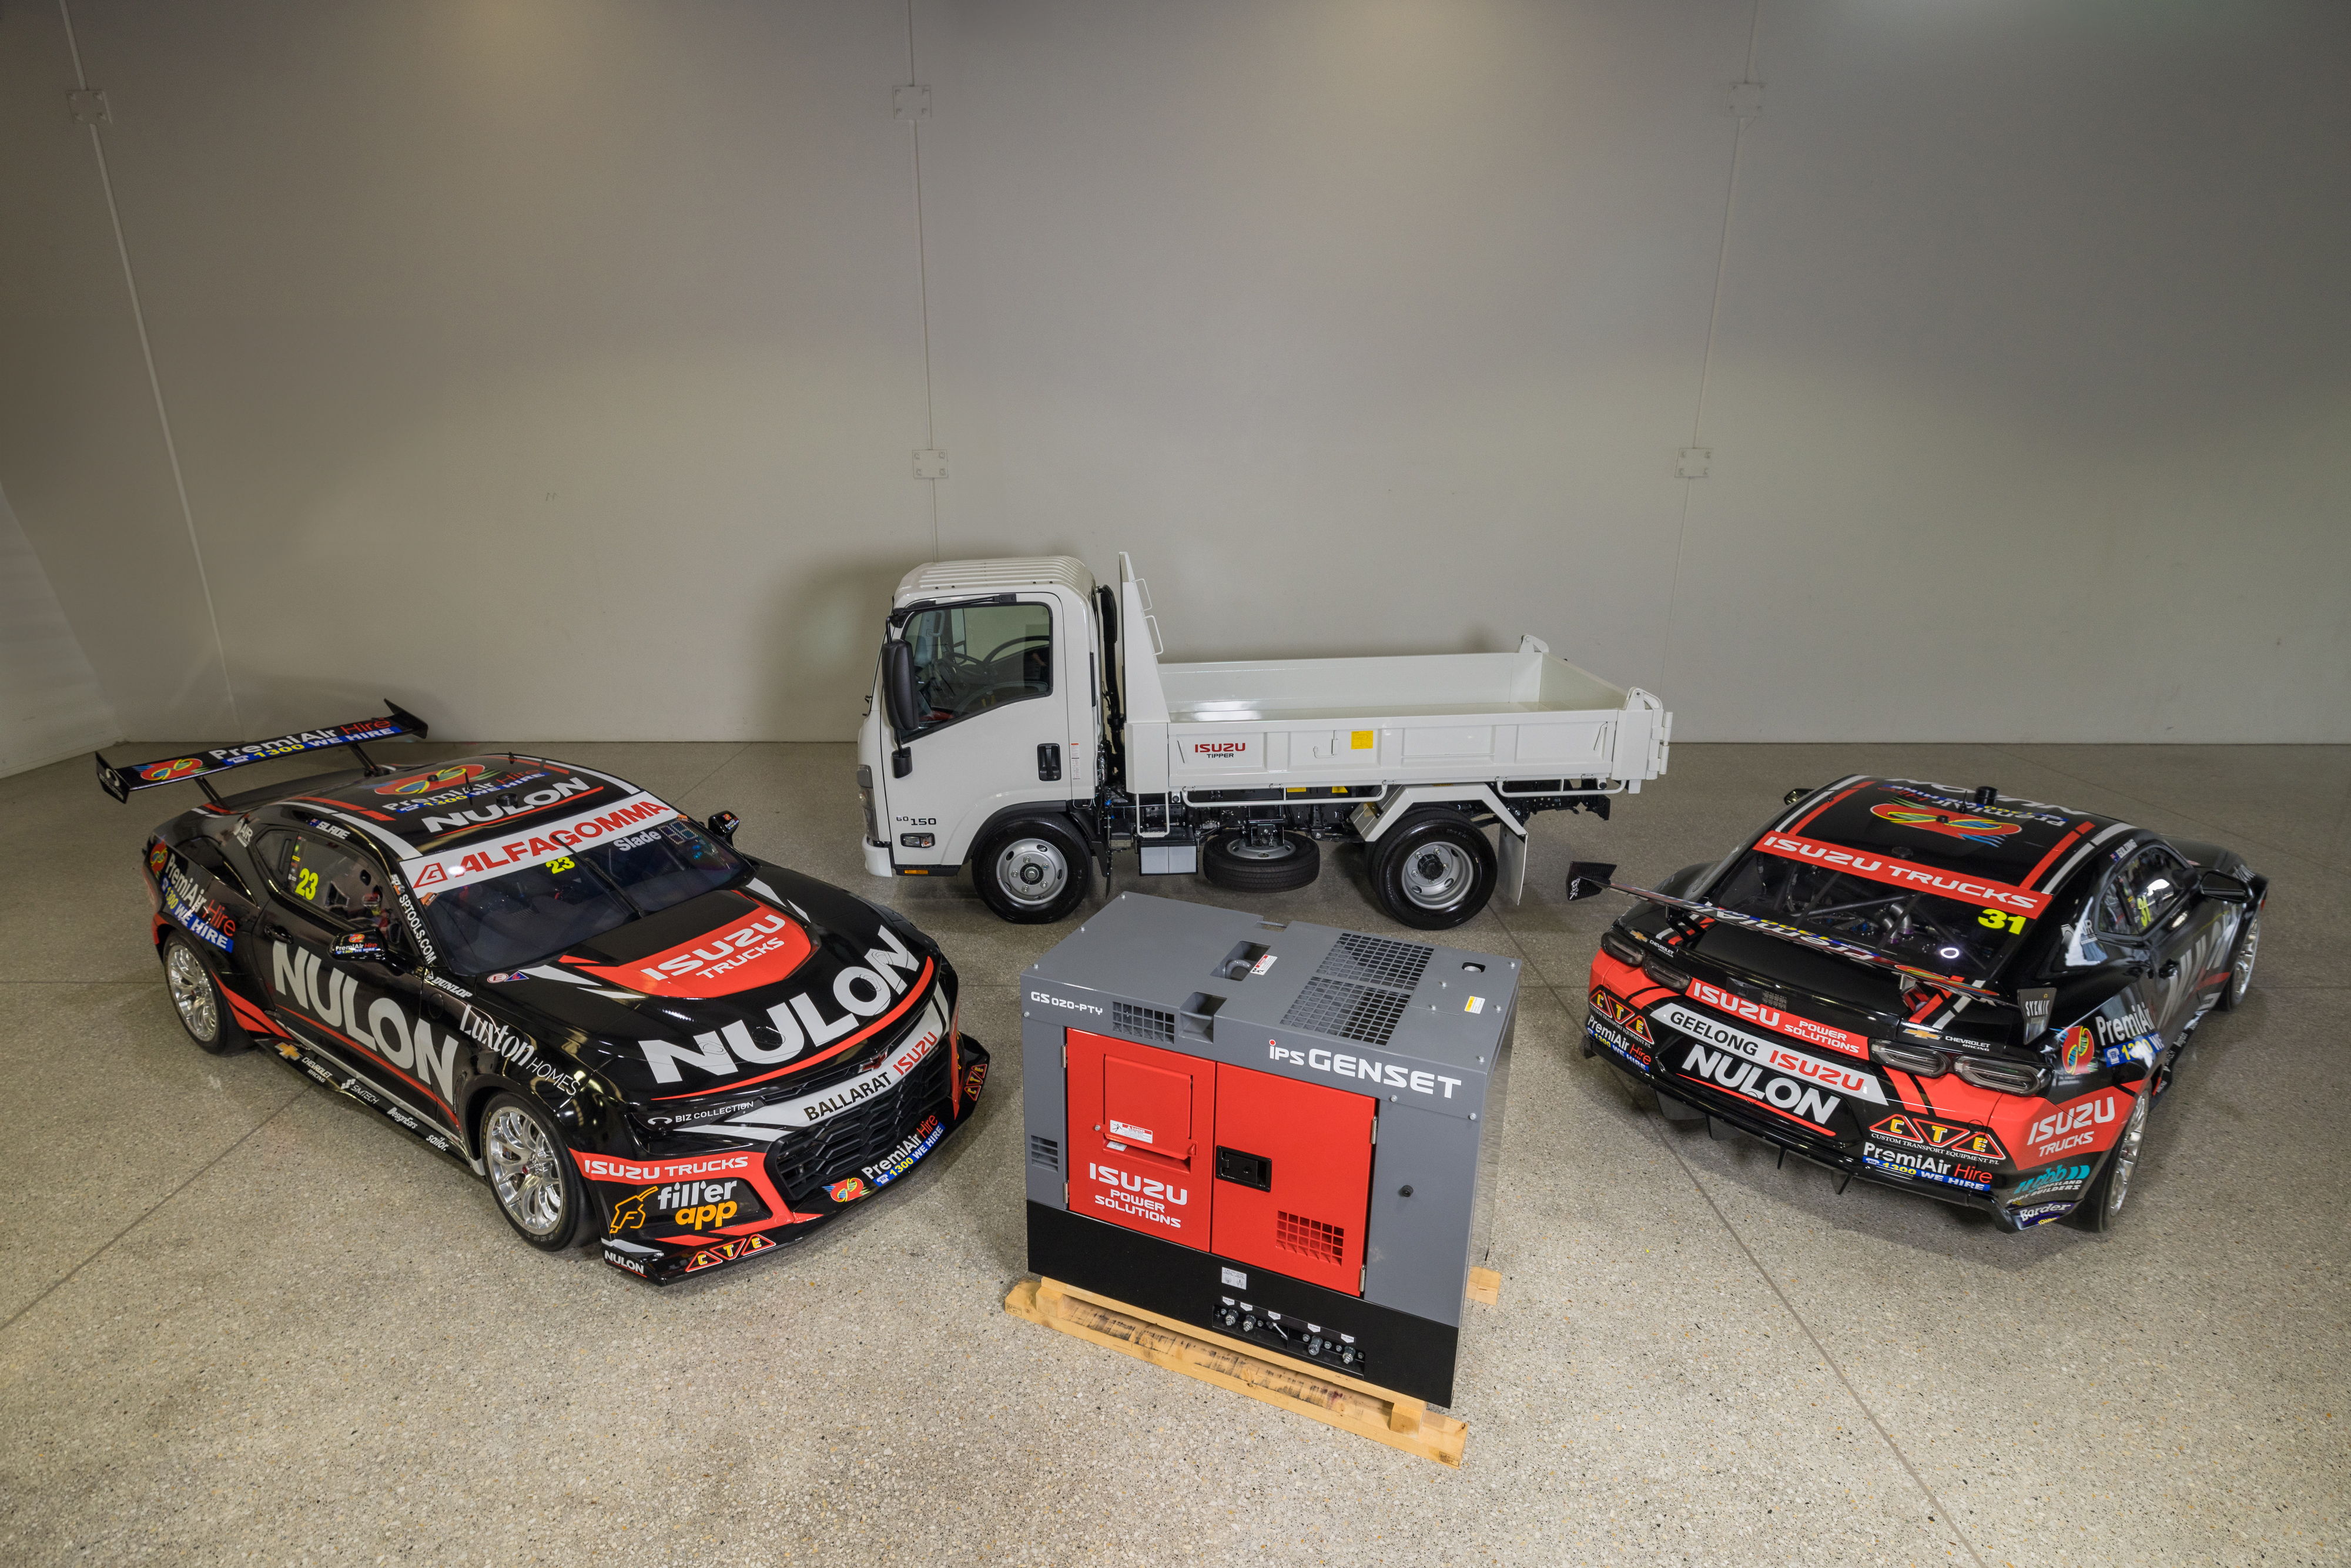 Isuzu's sponsorship includes both truck and power solutions branding